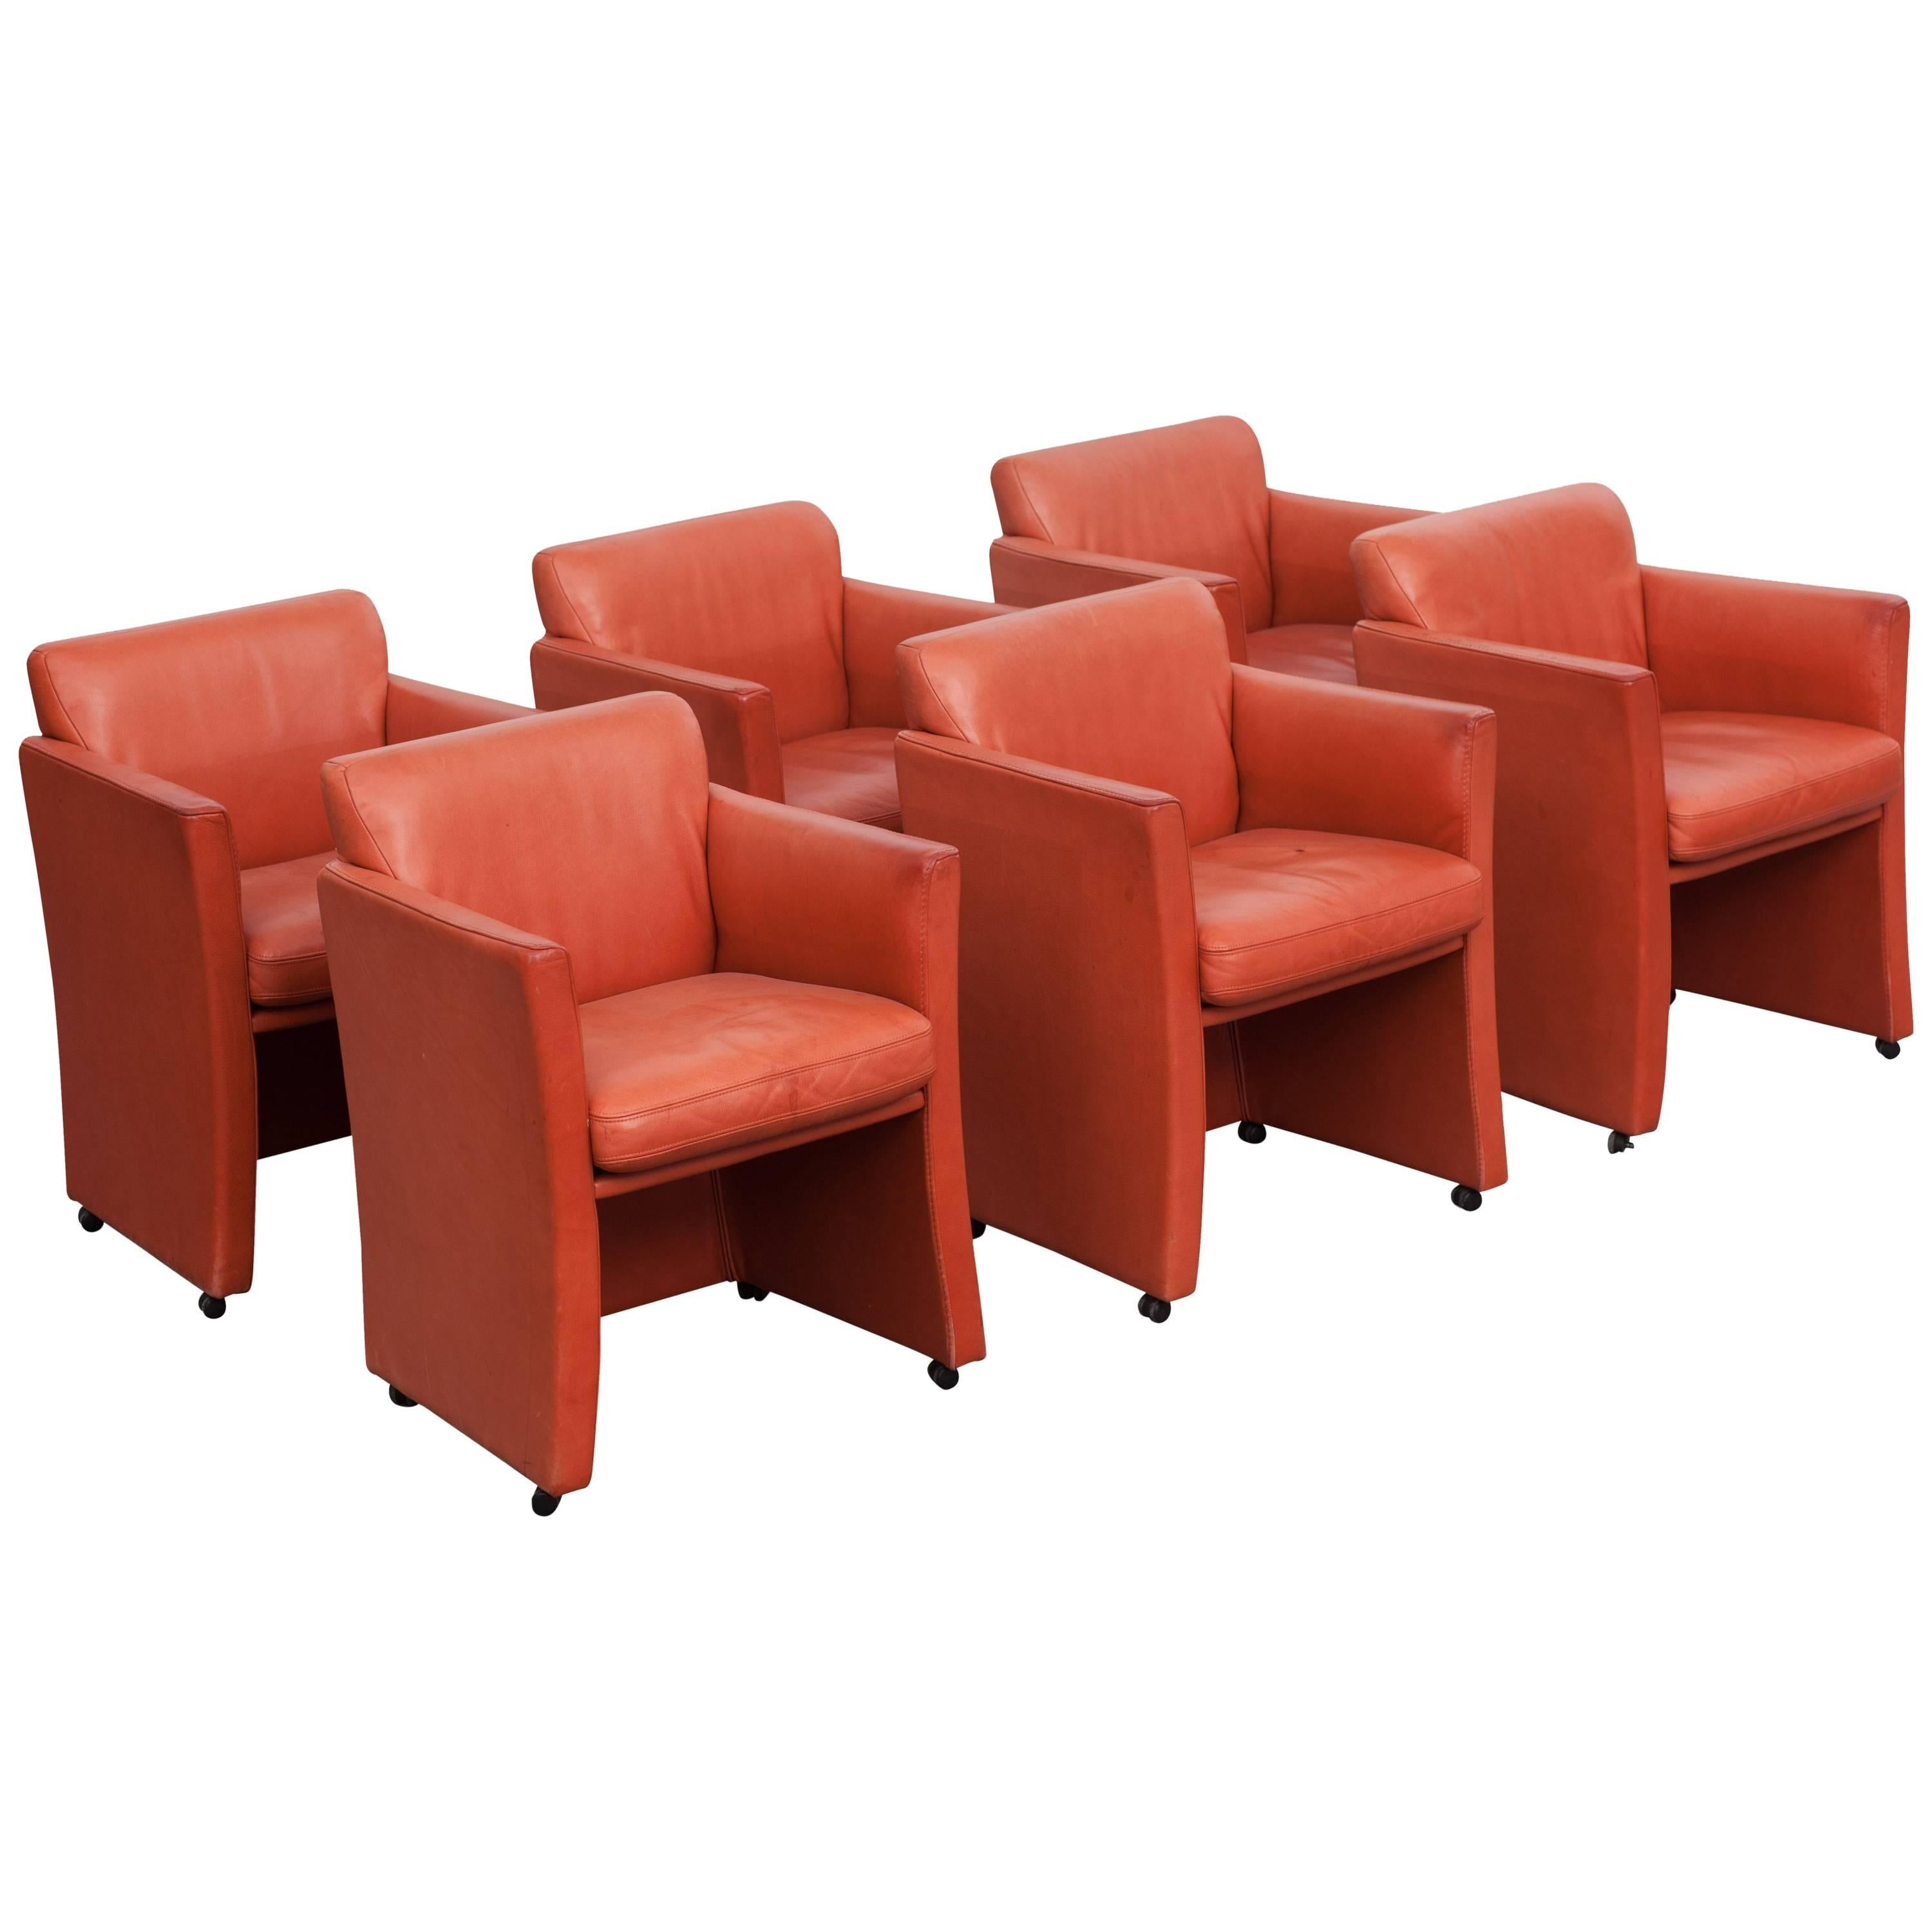 Durlet Red Leather Armchairs